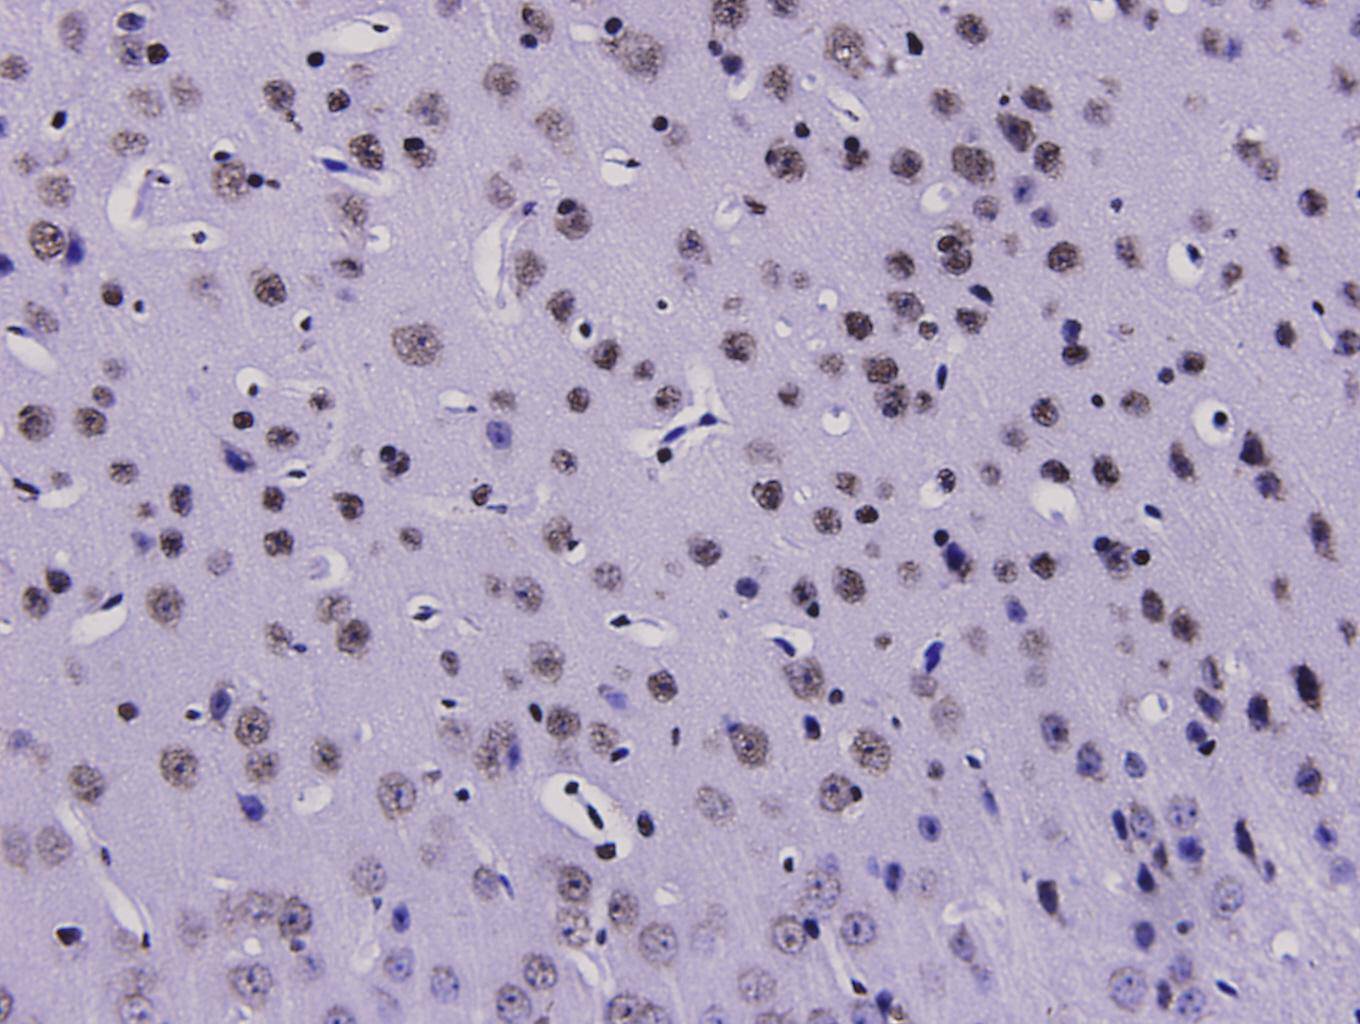 Immunohistochemical analysis of paraffin-embedded mouse brain tissue using anti- HMGB1 antibody. Counter stained with hematoxylin.